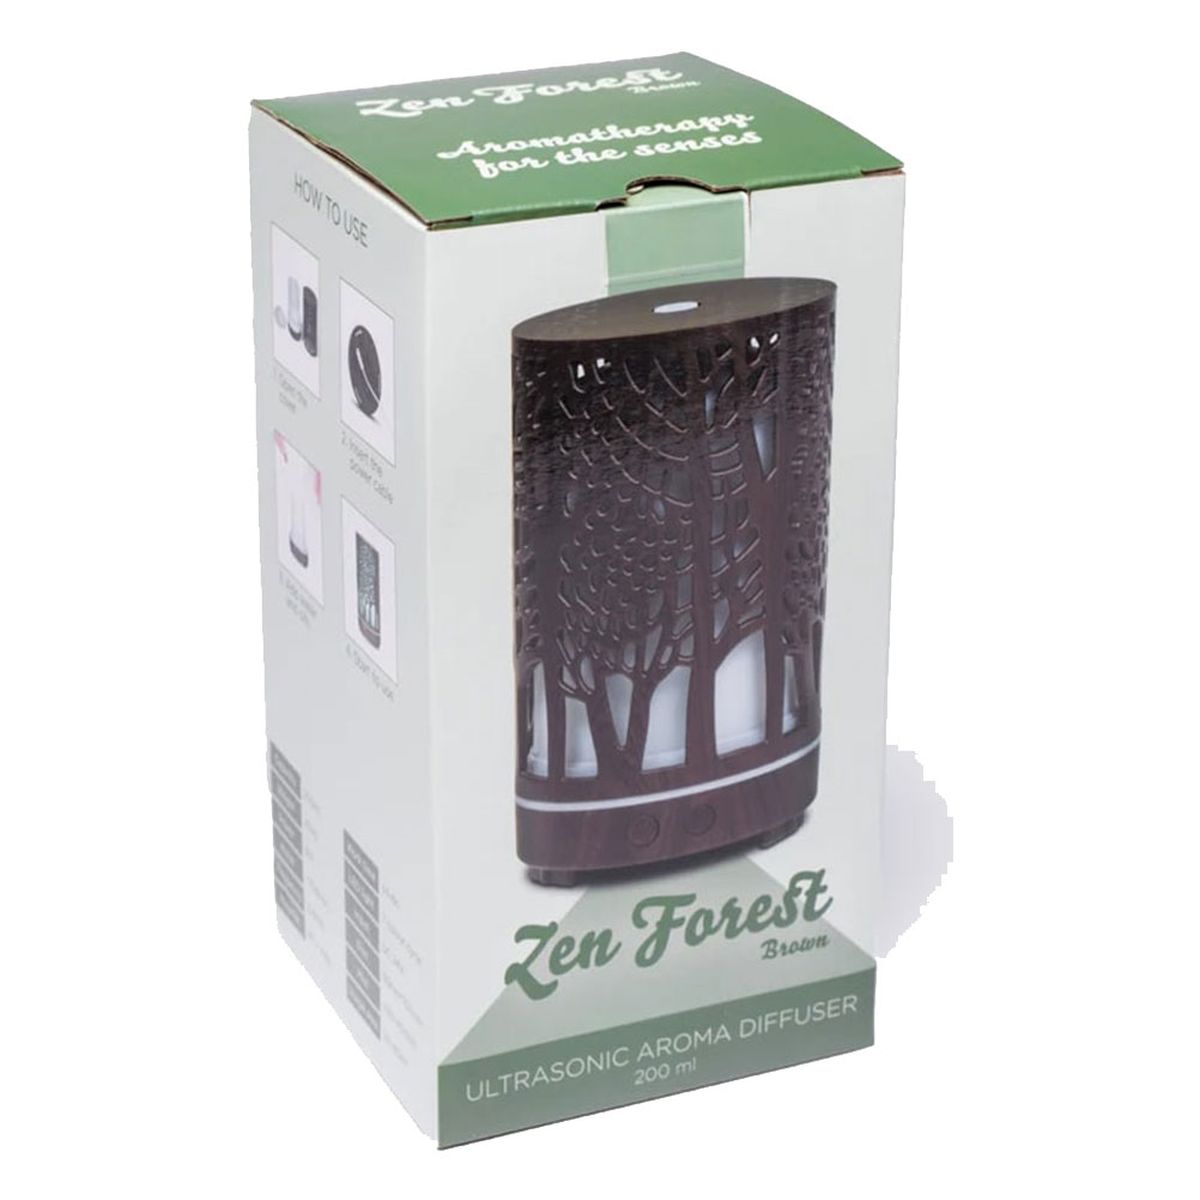 Ultrasonic aroma diffuser Zen Forest Brown